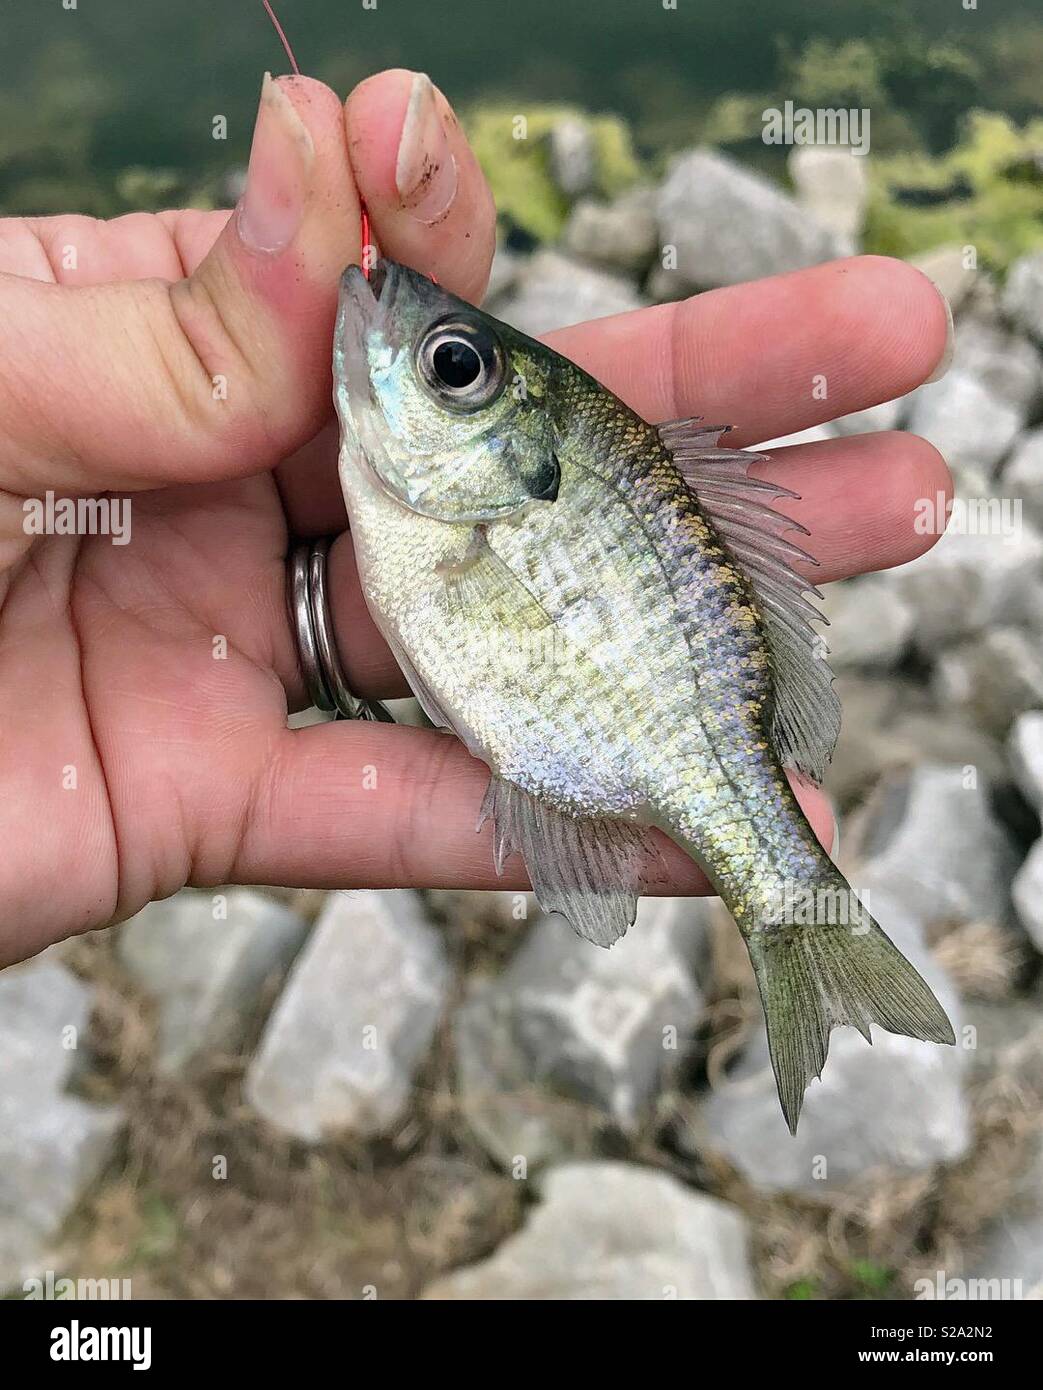 Person holding a baby bluegill fish caught on a pole with the hook still in its mouth also known as a bream, brim, sun fish or copper nose. Stock Photo